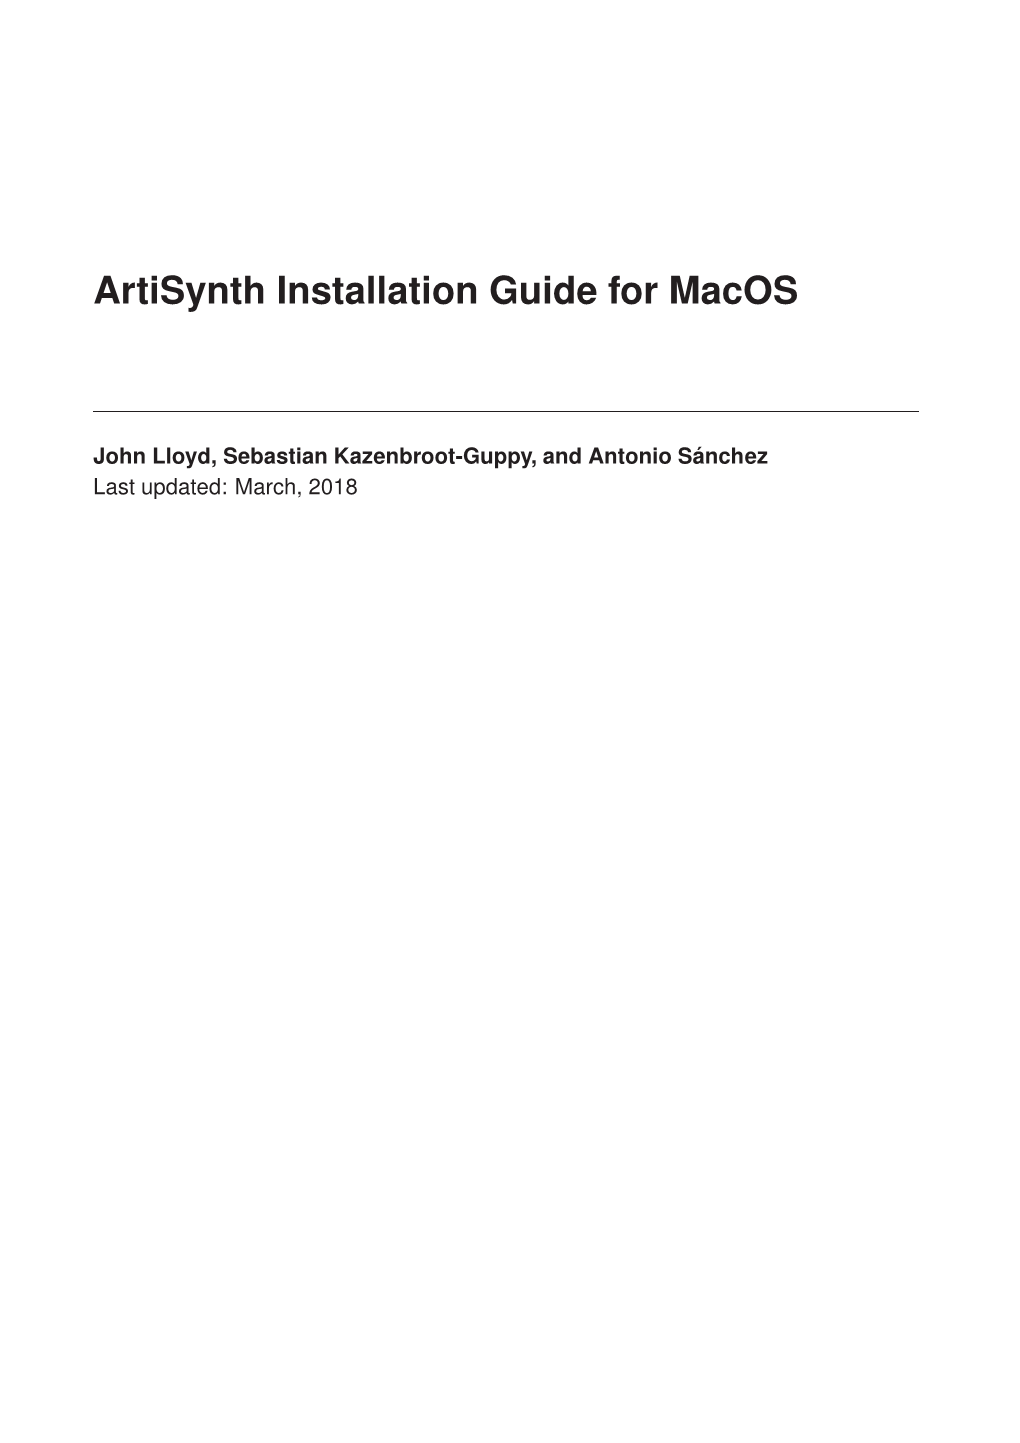 Artisynth Installation Guide for Macos